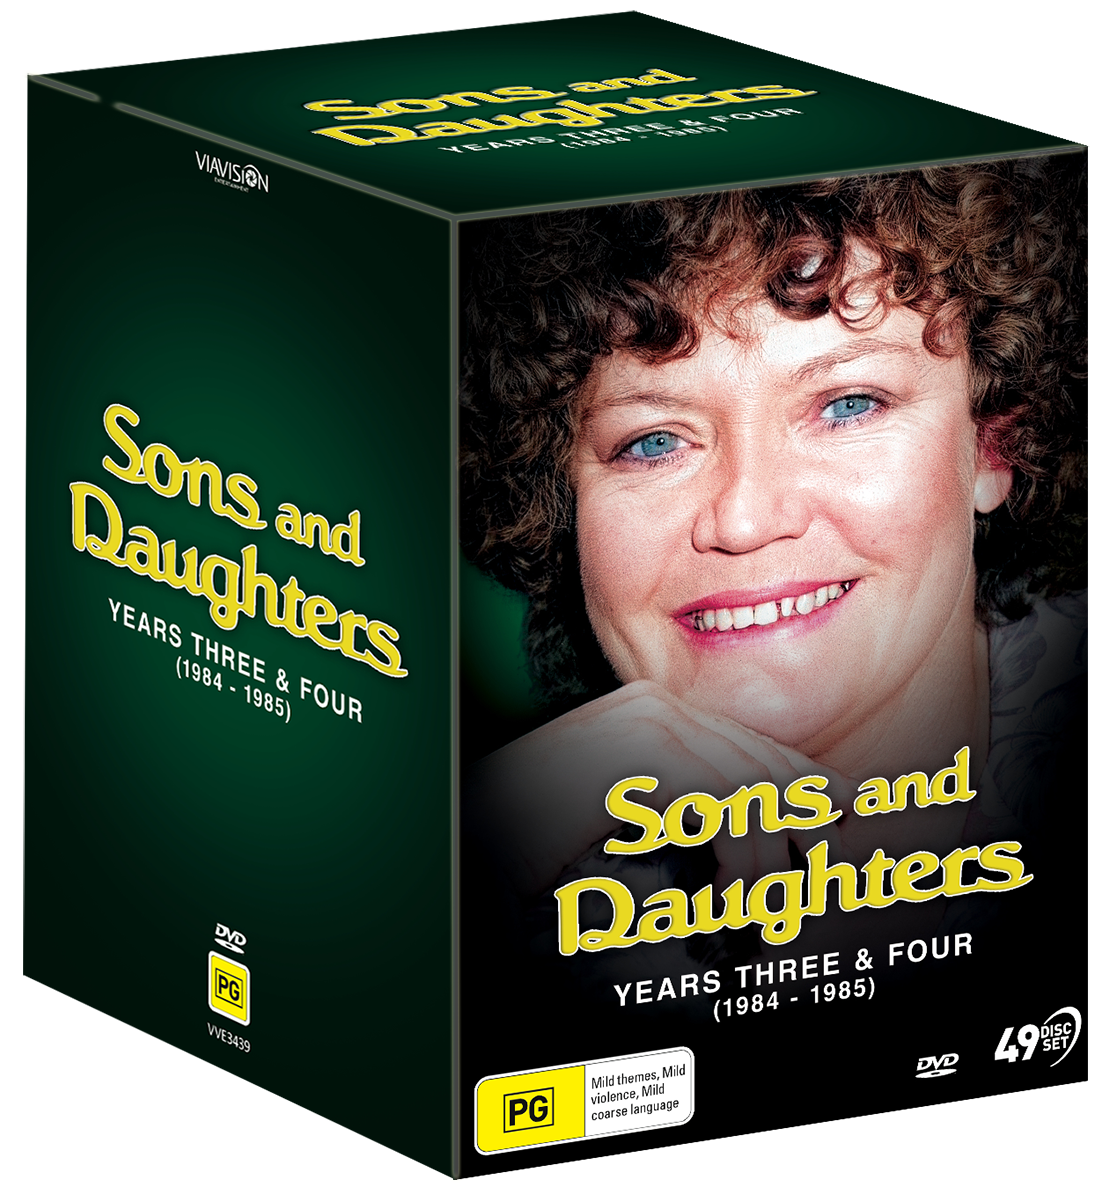 Sons And Daughters Years 3 And 4 1984 85 Via Vision Entertainment 